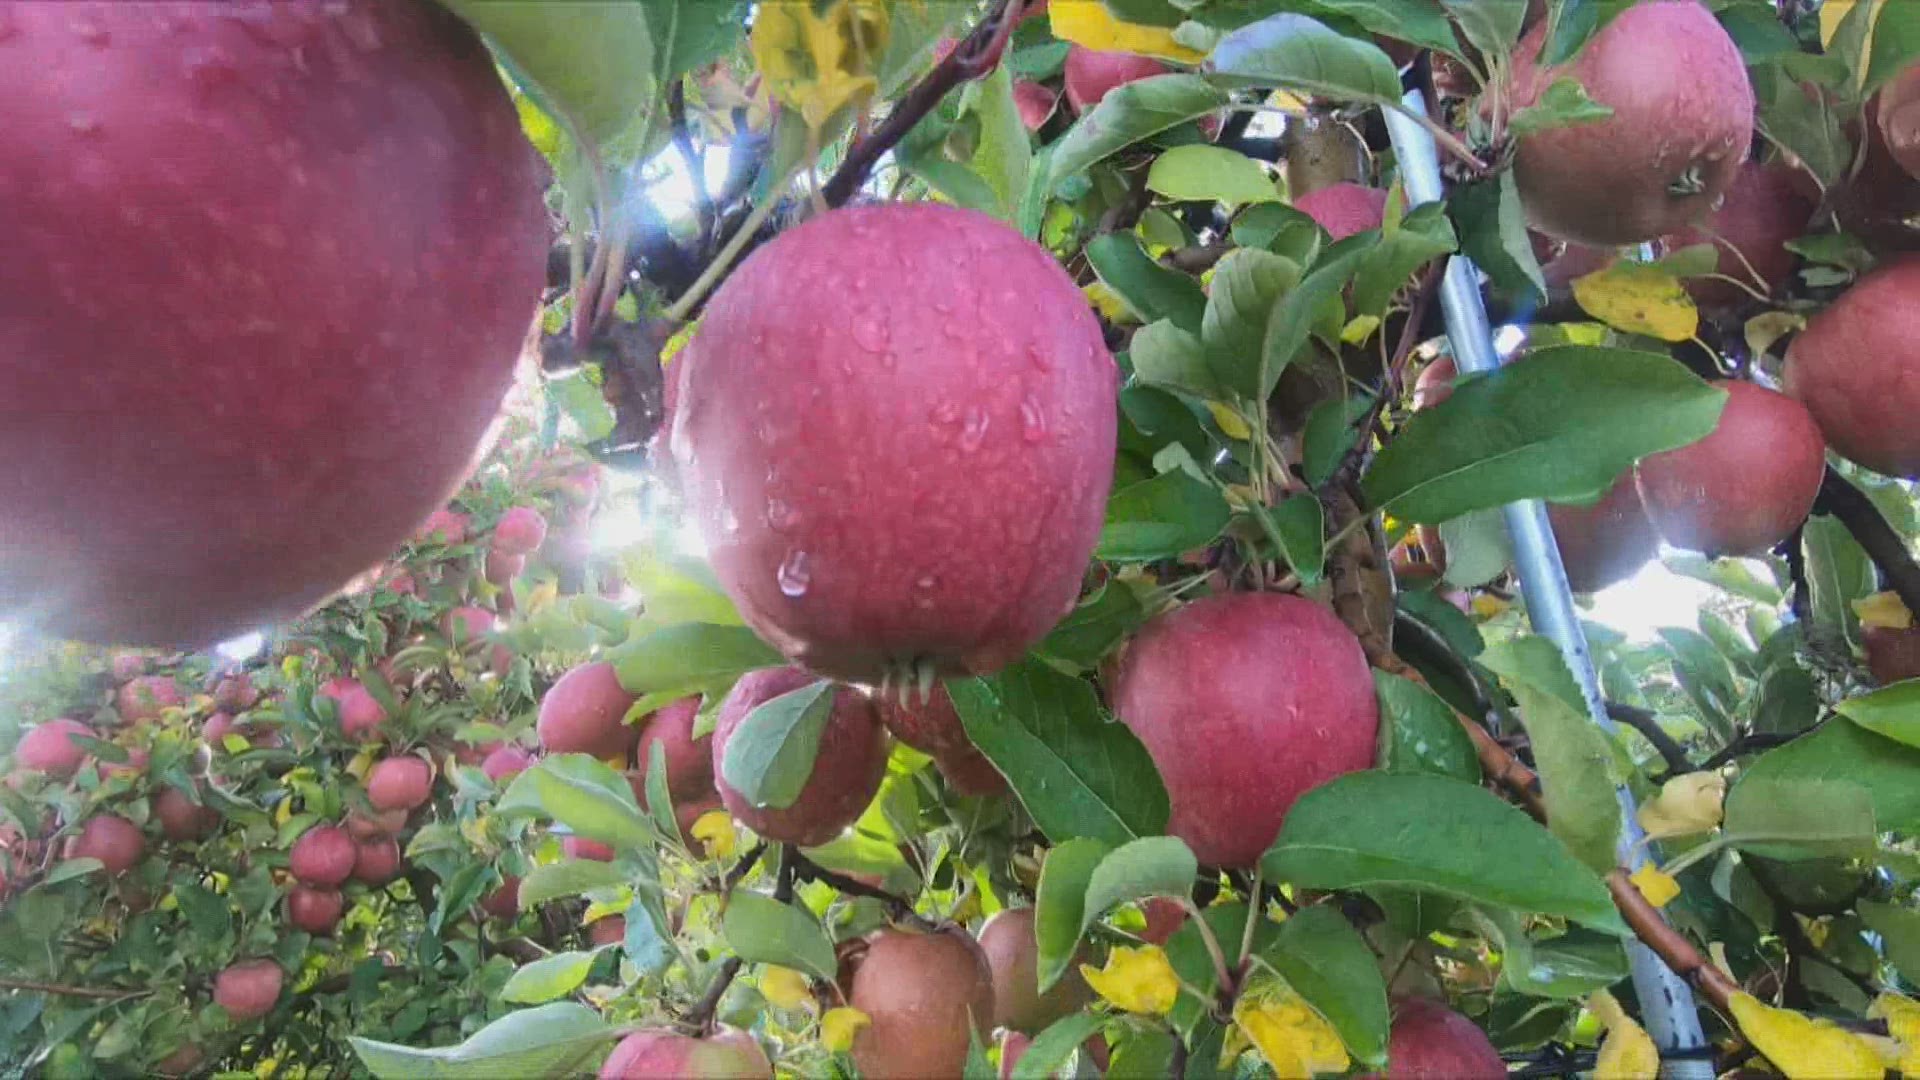 Warmer temperatures leading to early budding for the apple crop